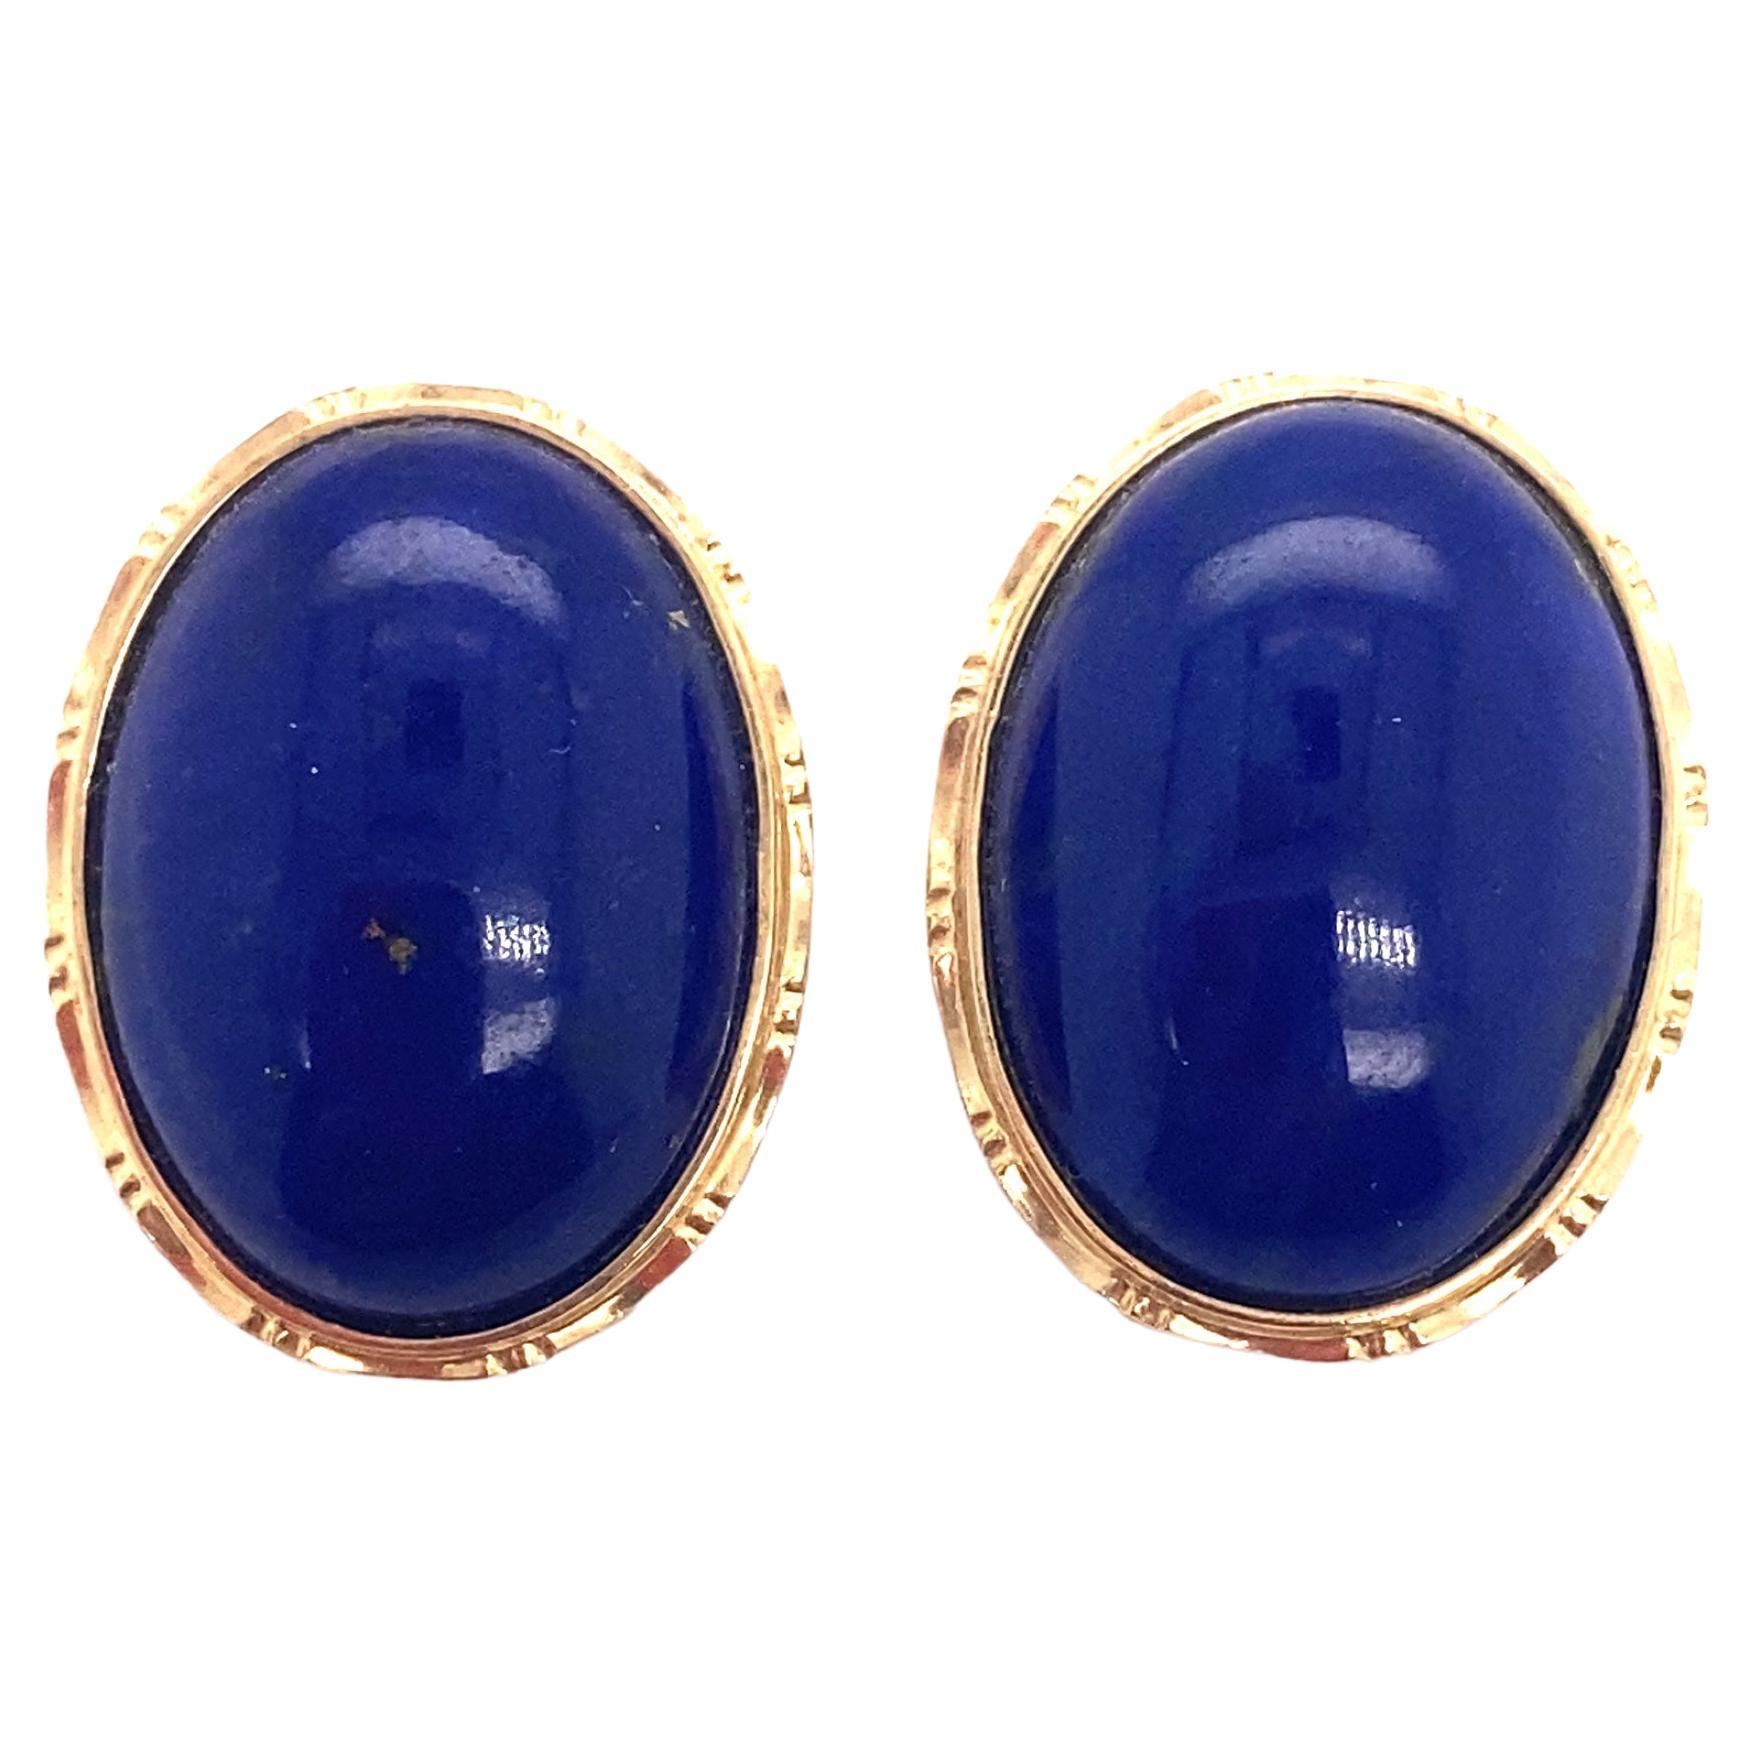 Circa 1940s Polished Lapis Lazuli Cabochon Earrings in 14K Gold